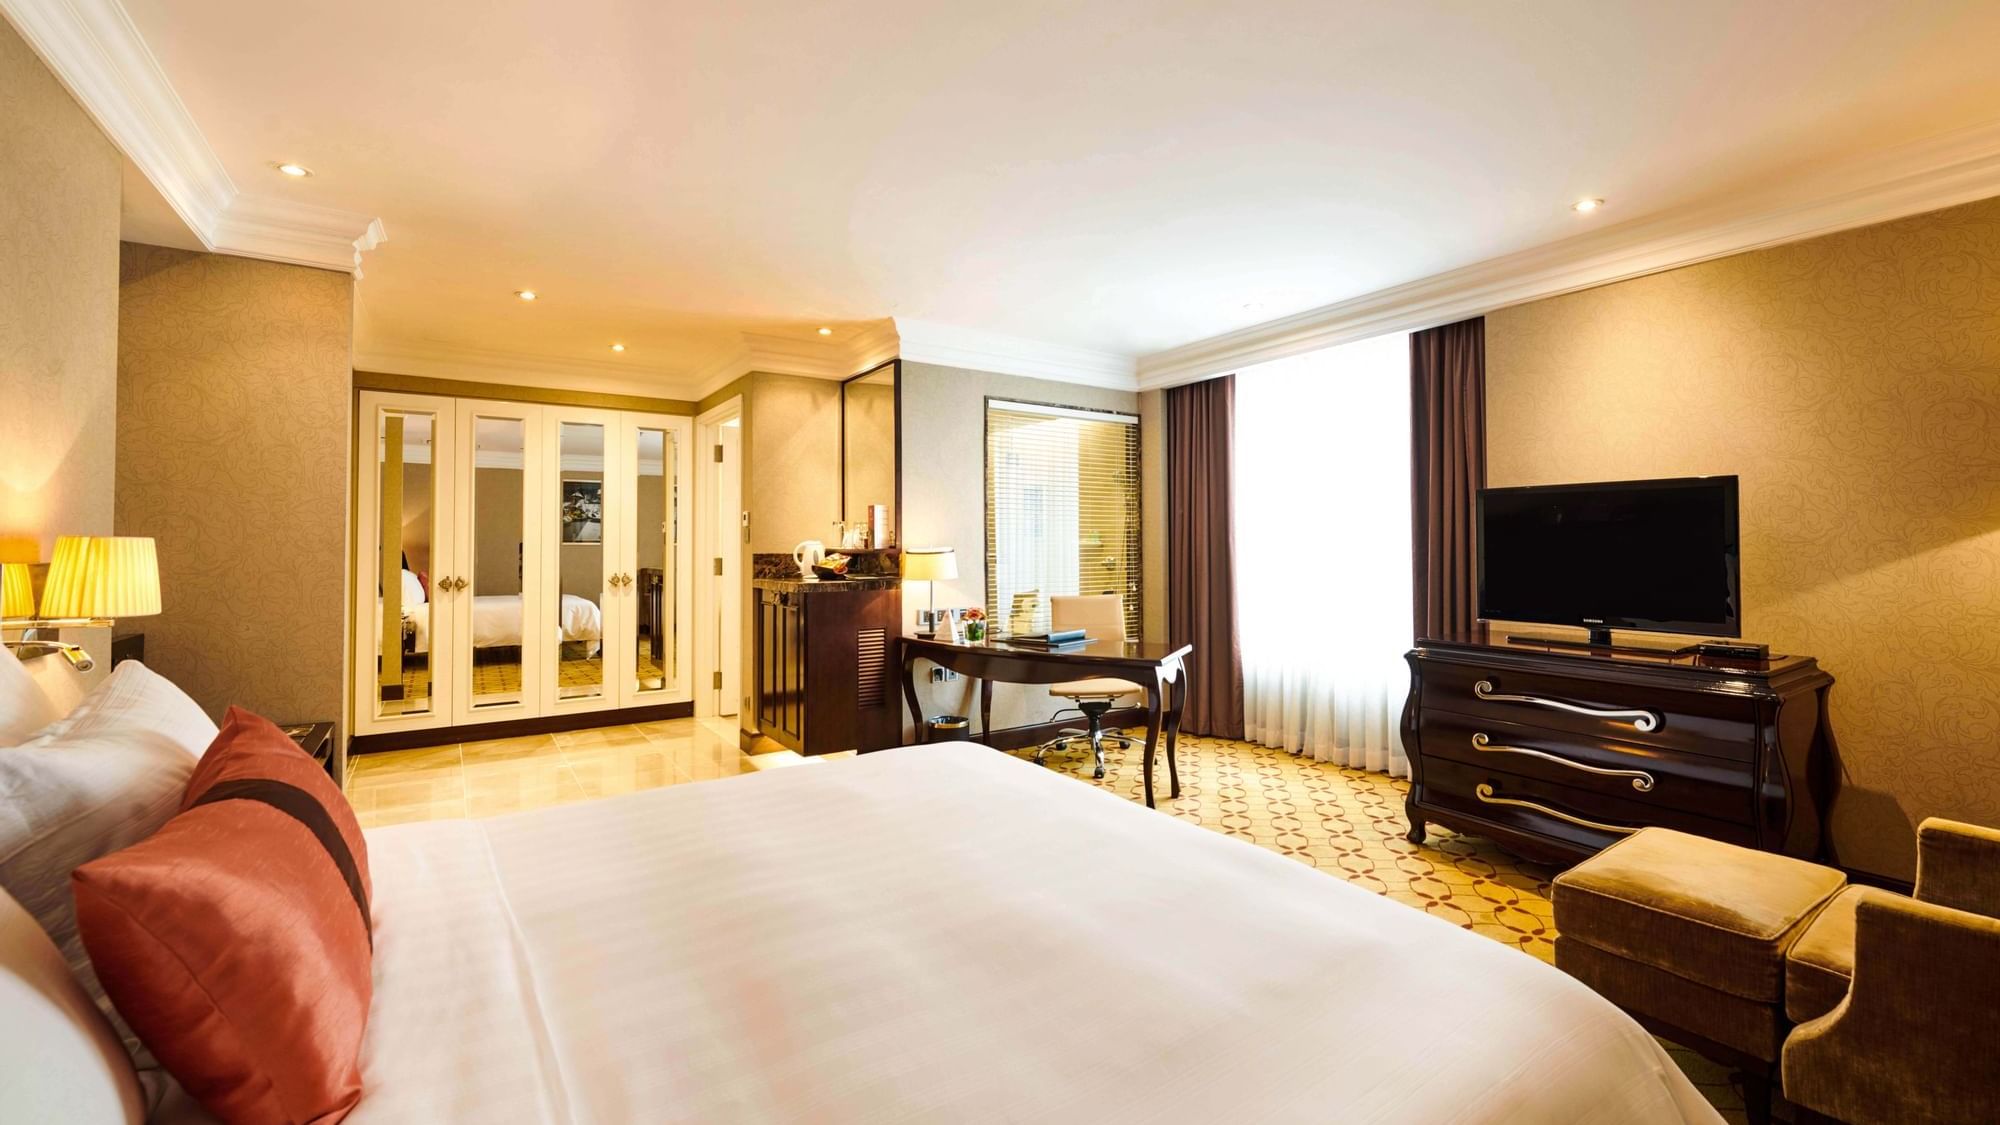 Bed & furniture in Premium Deluxe Room at Eastin Hotels